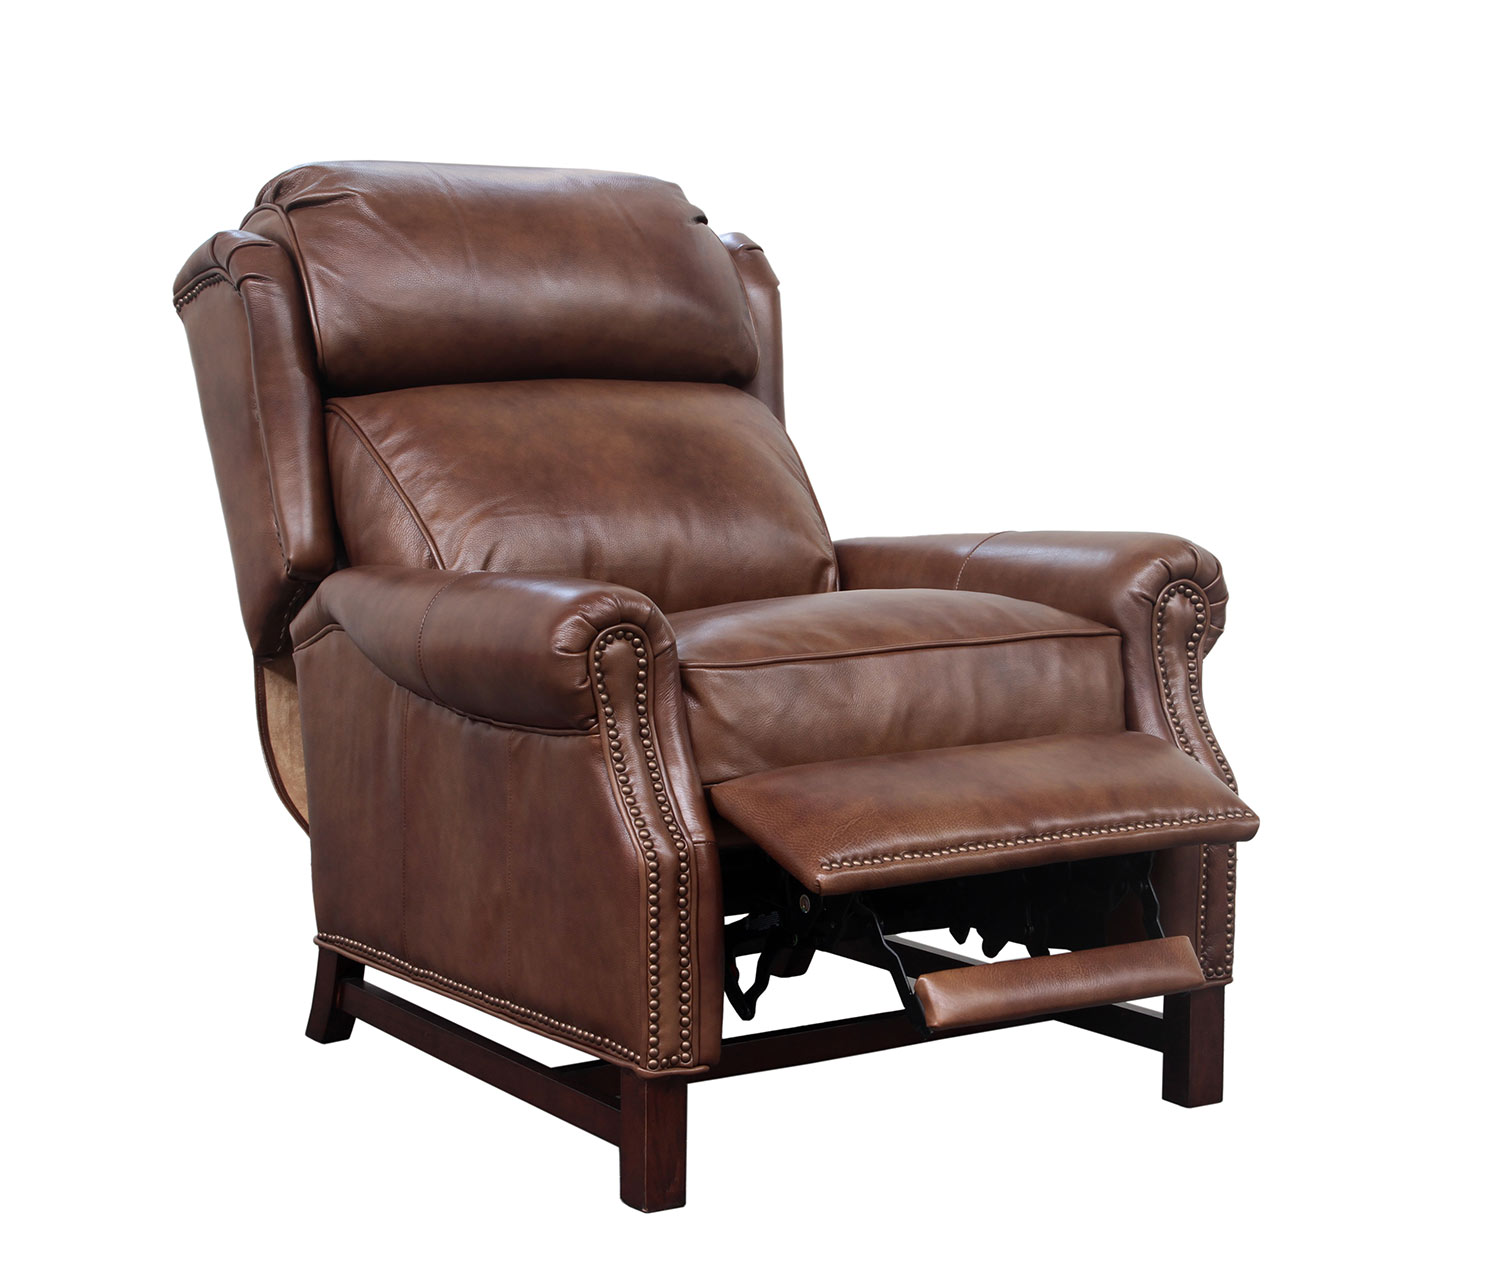 Barcalounger Thornfield Recliner Chair - Wenlock Tawny/All Leather